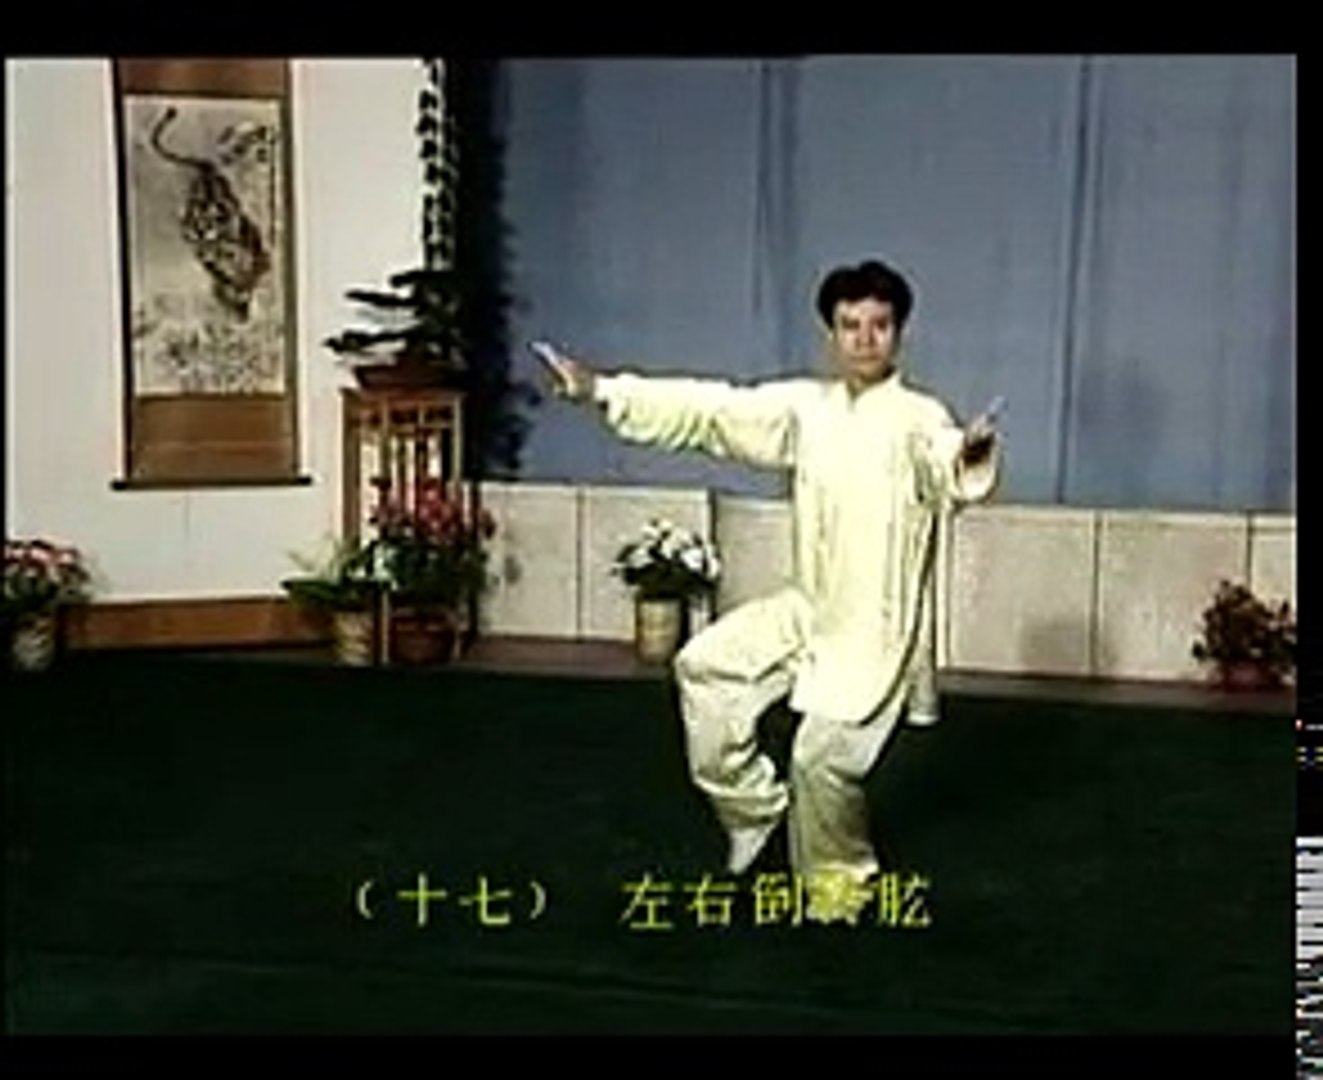 Tai chi chuan - 108 form - Back view - Yang style - video Dailymotion